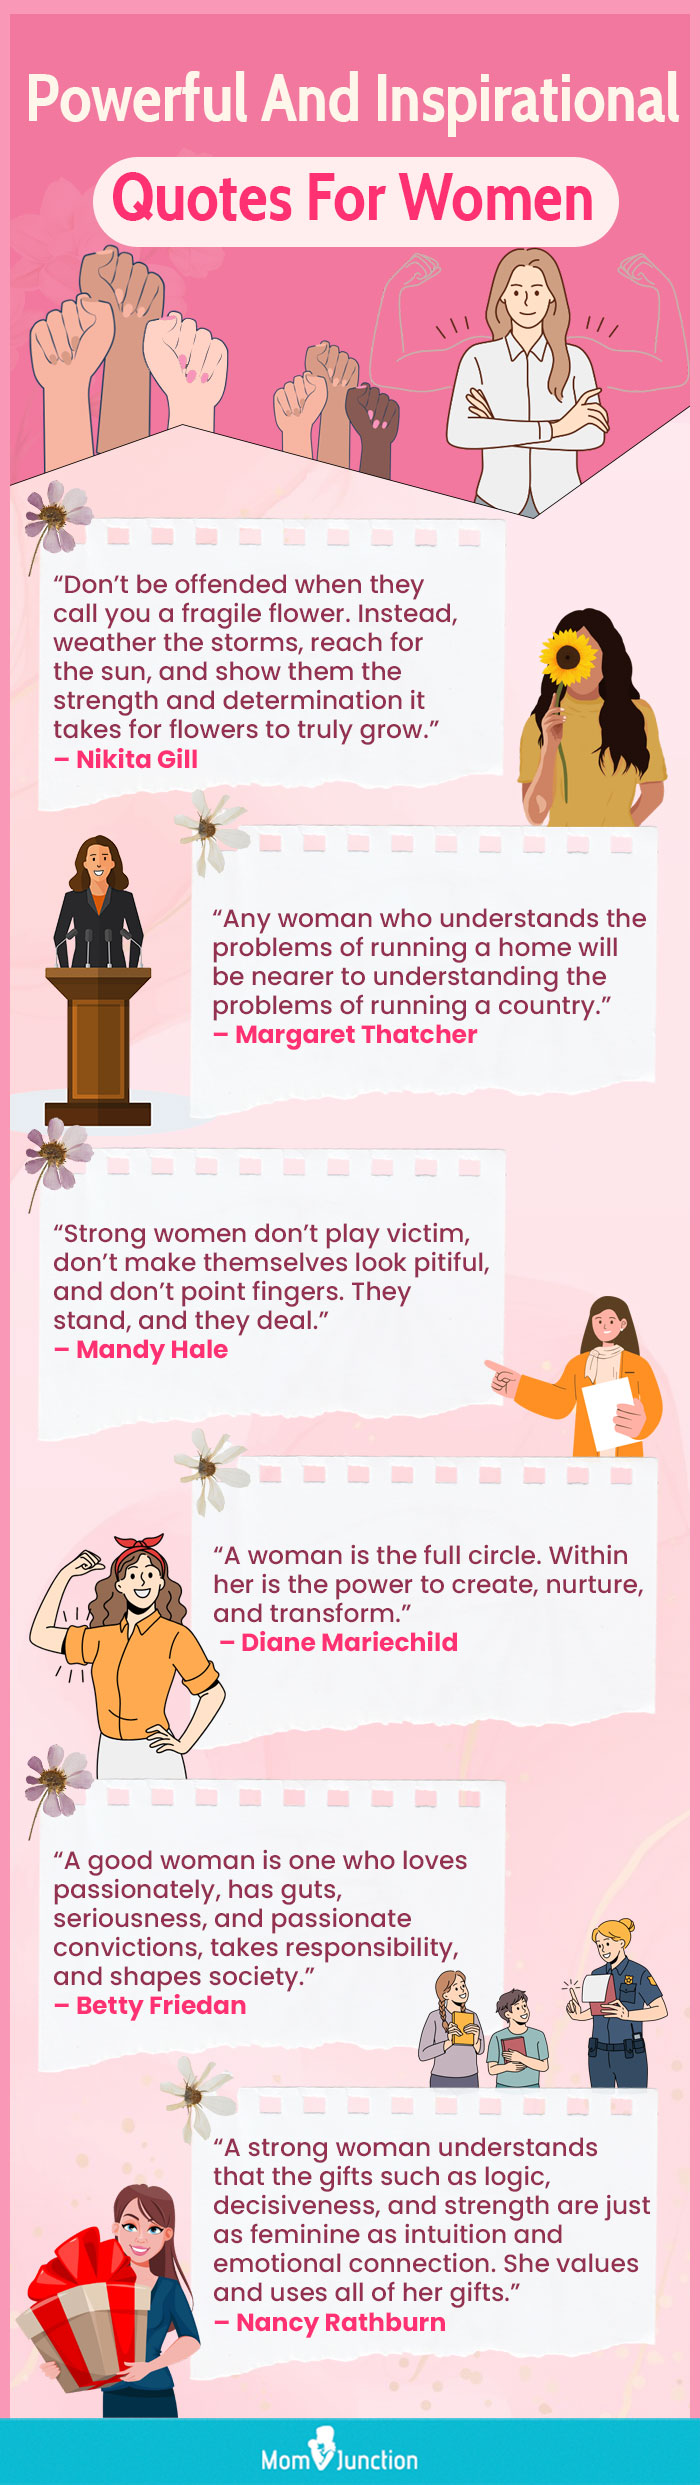 powerful and inspirational quotes for women (infographic)